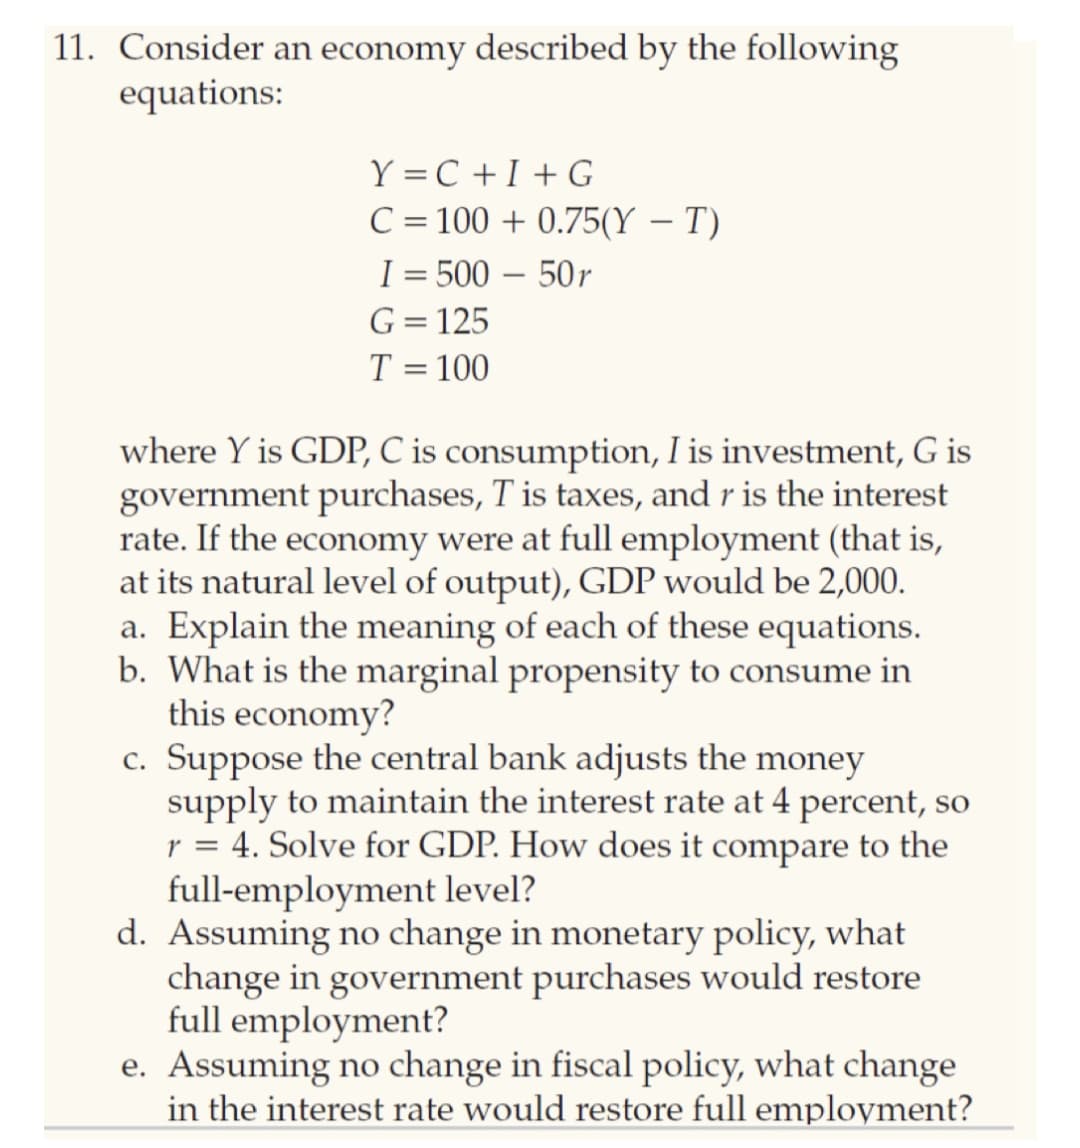 11. Consider an economy described by the following
equations:
Y =C +I + G
C = 100 + 0.75(Y – T)
I = 500 – 50r
G= 125
T = 100
where Y is GDP, C is consumption, I is investment, G is
government purchases, T is taxes, and r is the interest
rate. If the economy were at full employment (that is,
at its natural level of output), GDP would be 2,000.
a. Explain the meaning of each of these equations.
b. What is the marginal propensity to consume in
this economy?
c. Suppose the central bank adjusts the money
supply to maintain the interest rate at 4 percent, so
r = 4. Solve for GDP. How does it compare to the
full-employment level?
d. Assuming no change in monetary policy, what
change in government purchases would restore
full employment?
e. Assuming no change in fiscal policy, what change
in the interest rate would restore full employment?
